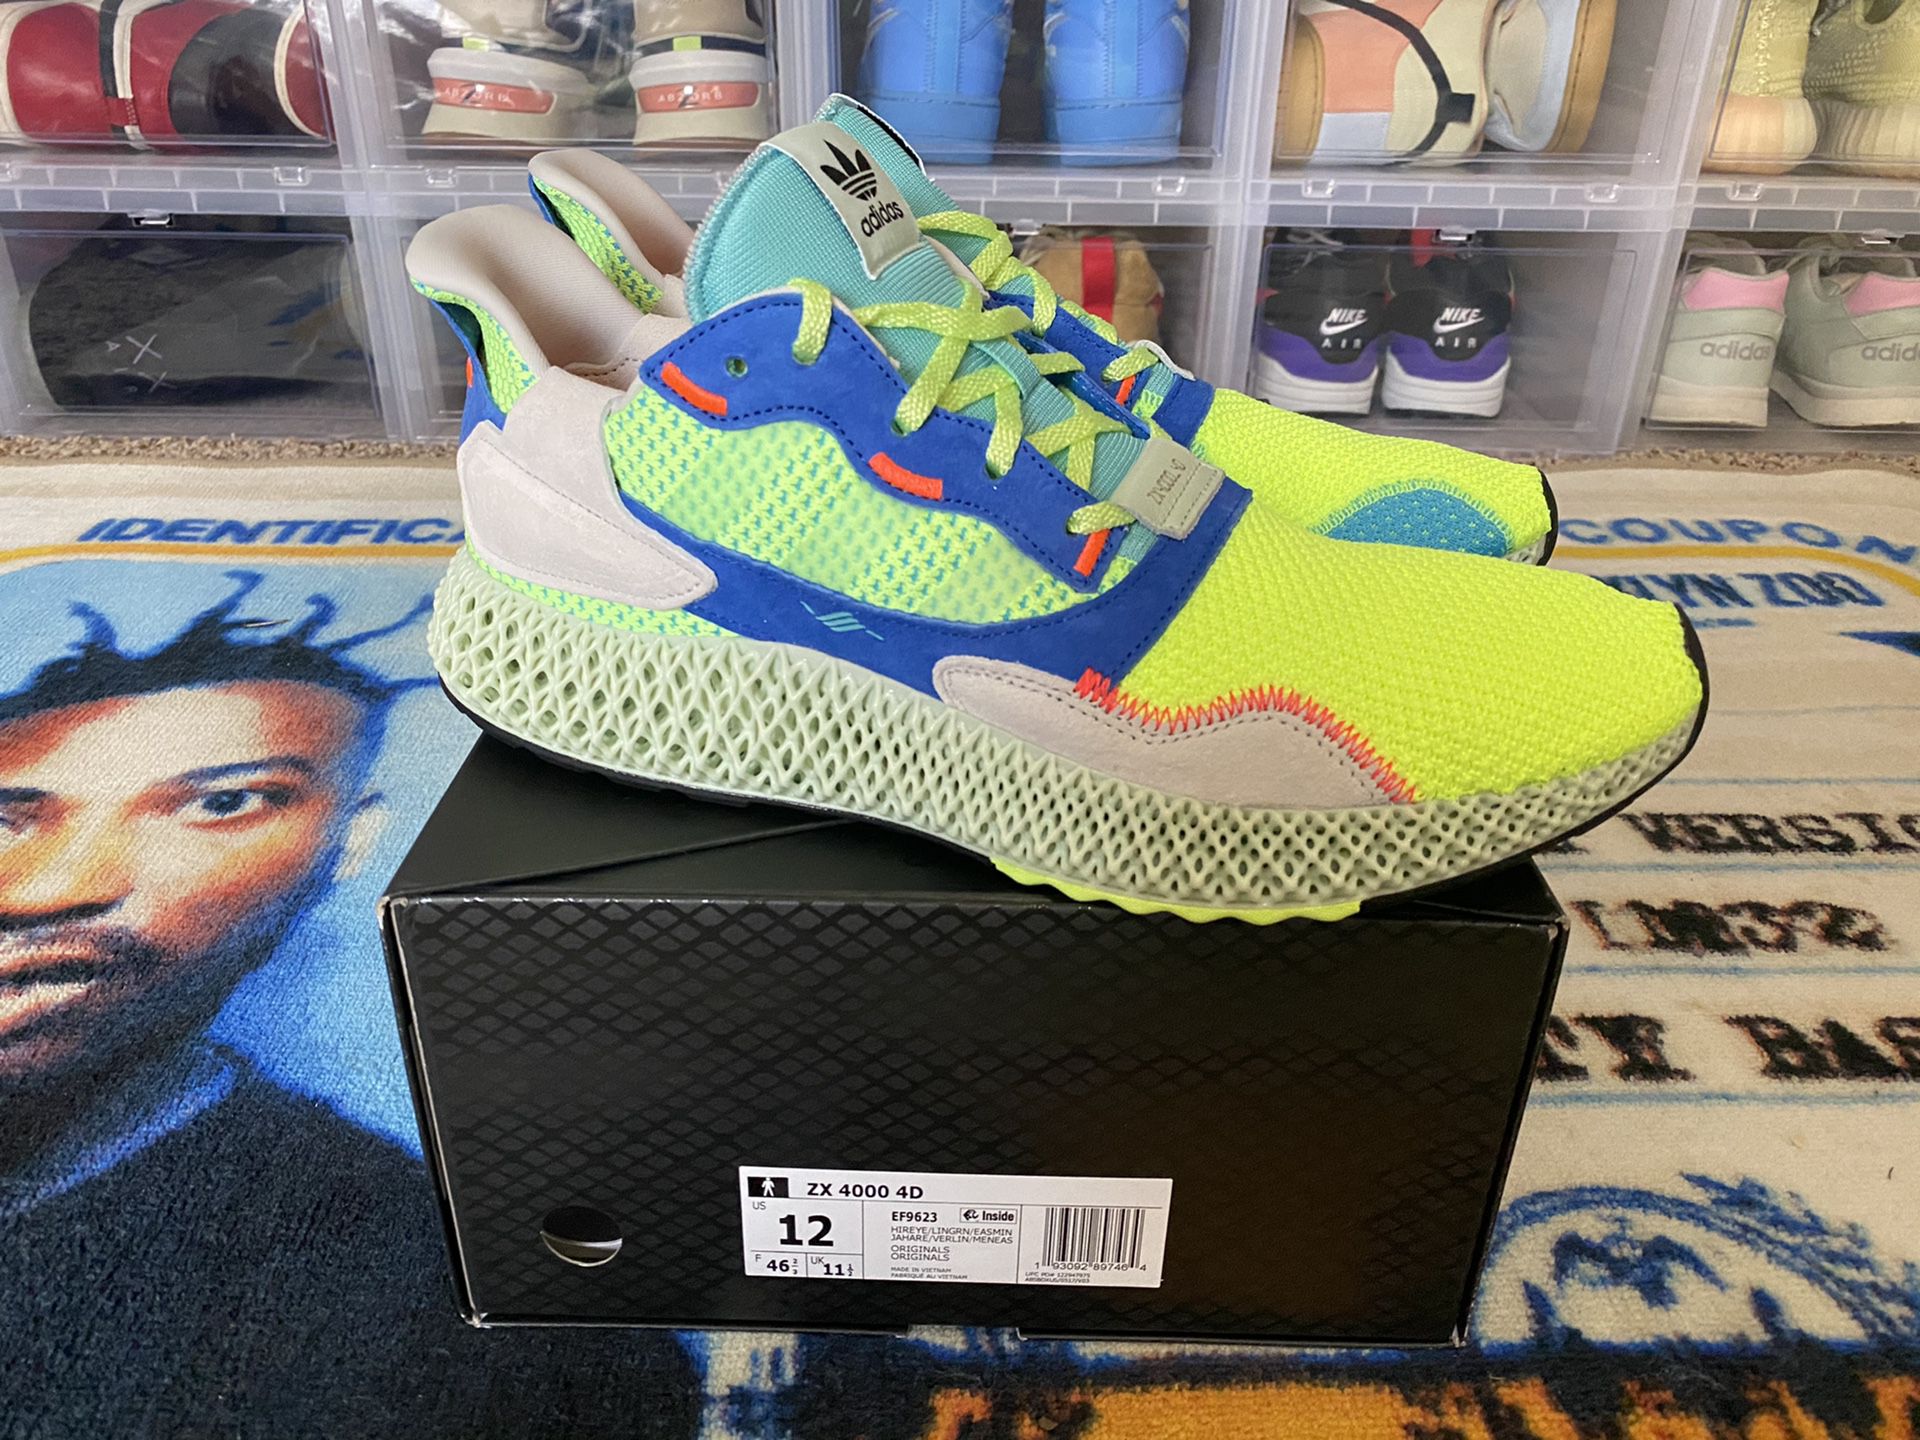 Adidas ZX4000 4d easy mint size 12